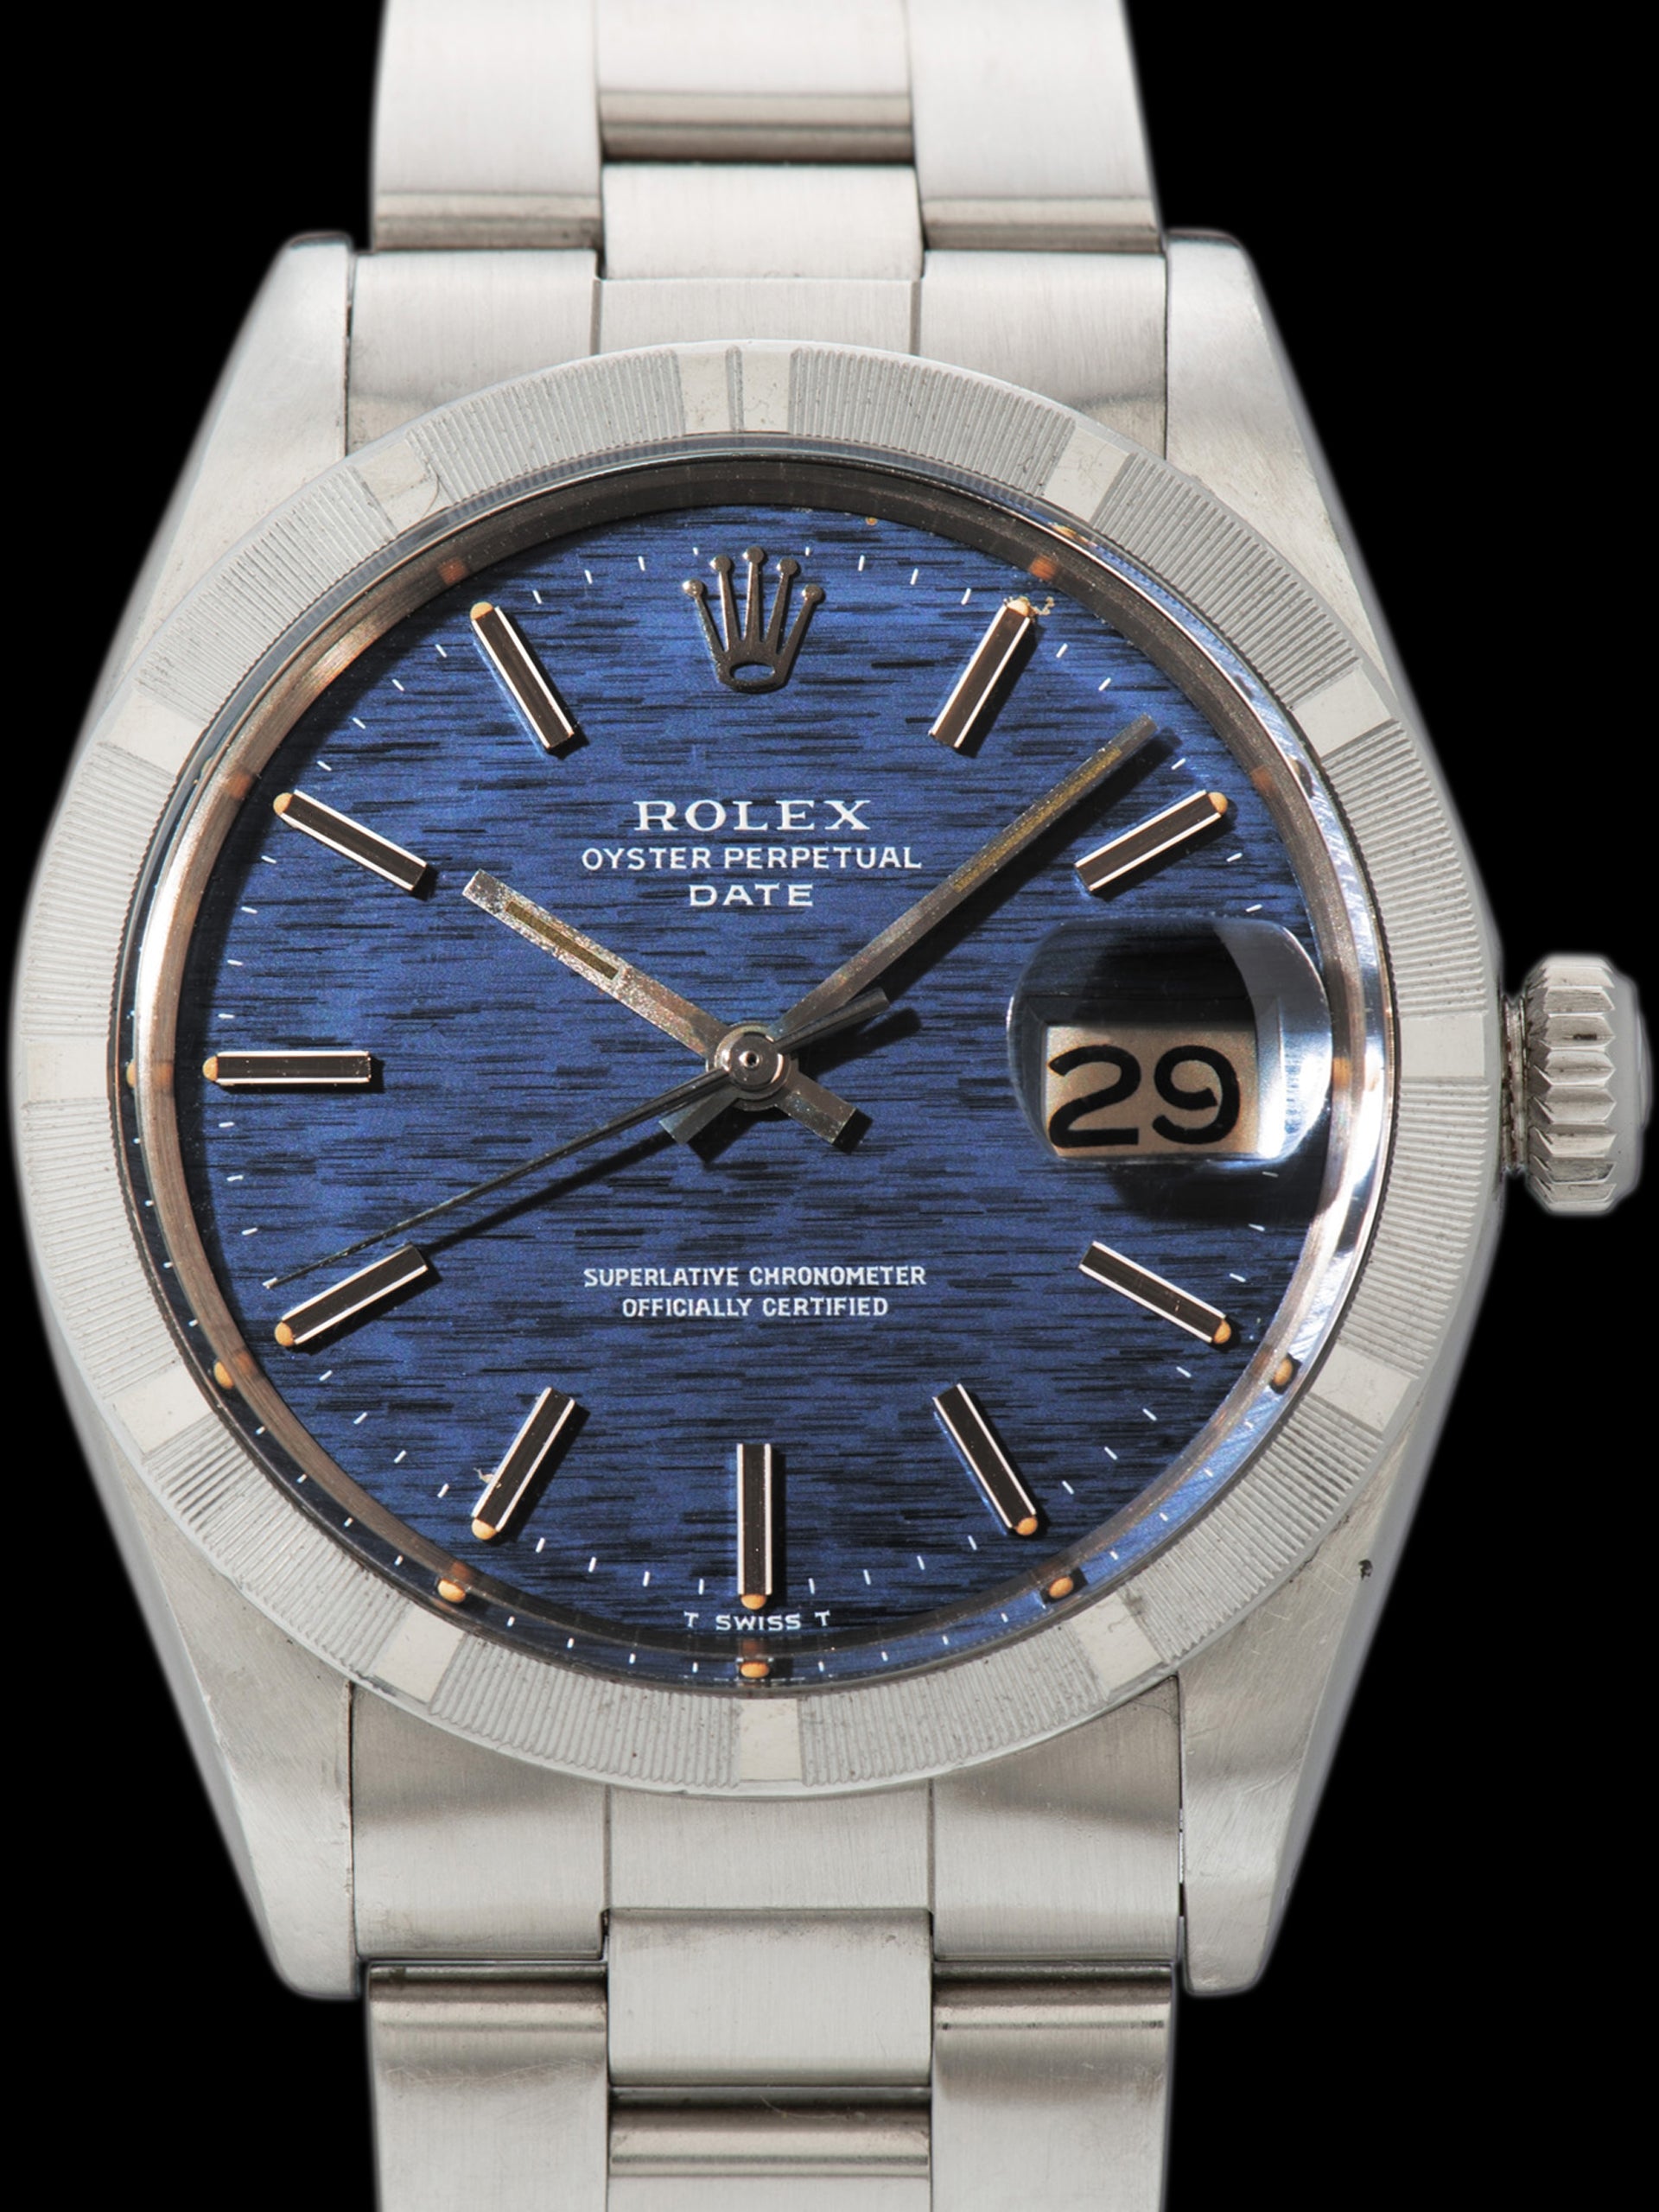 *Unpolished* 1972 Rolex Oyster-Perpetual Date (Ref. 1501) Blue Mosaic Dial